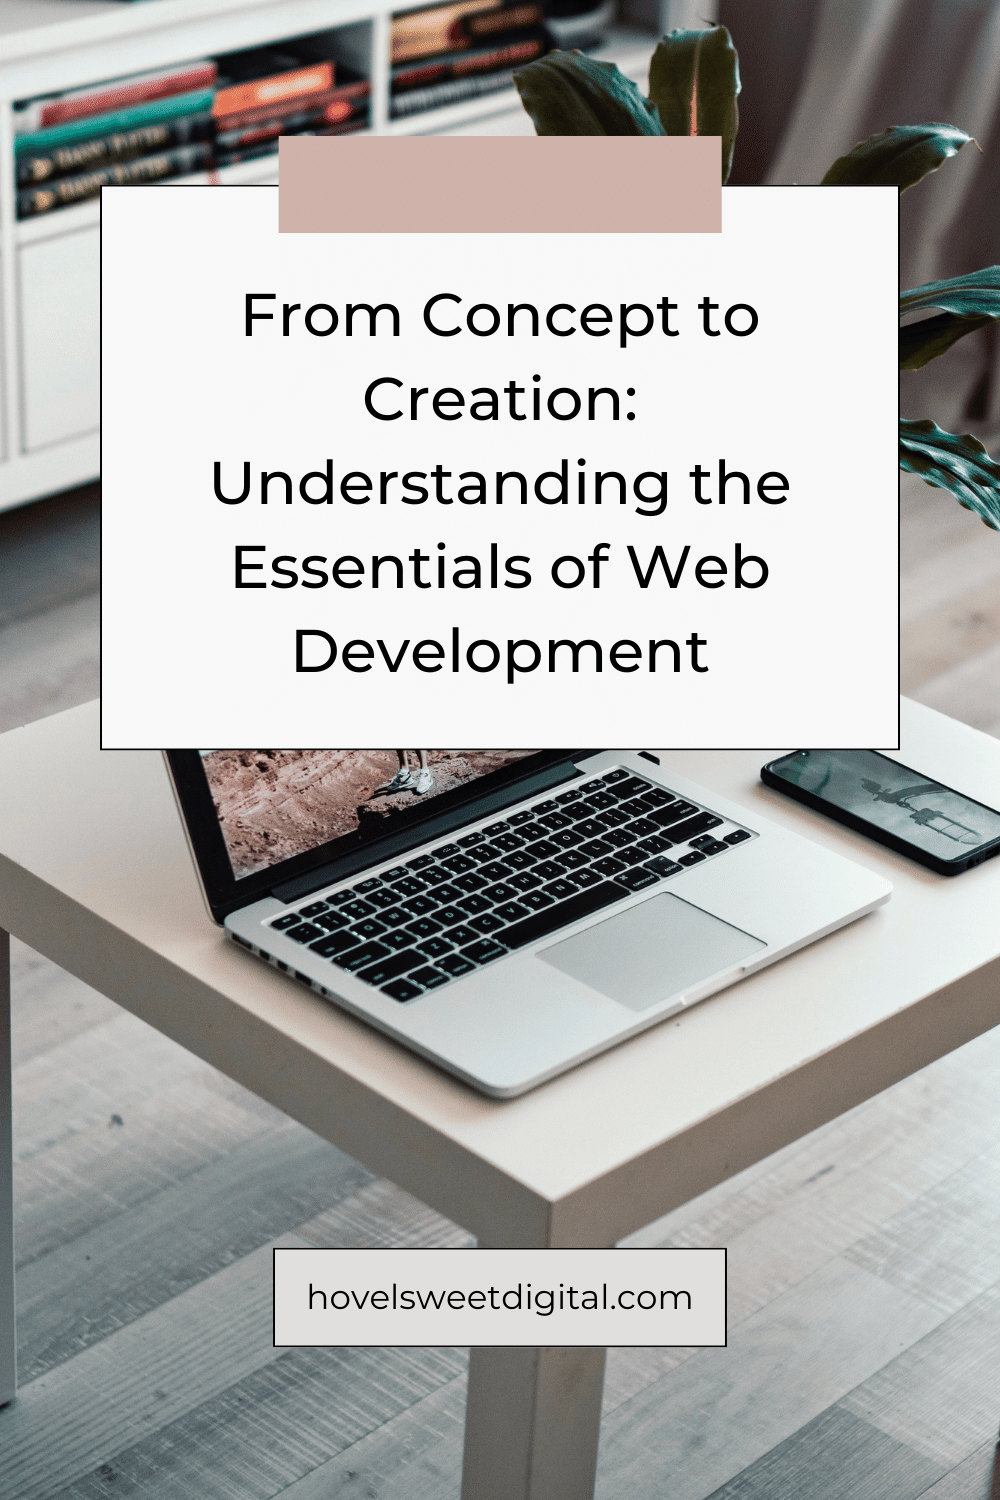 From Concept to Creation: Understanding the Essentials of Web Development